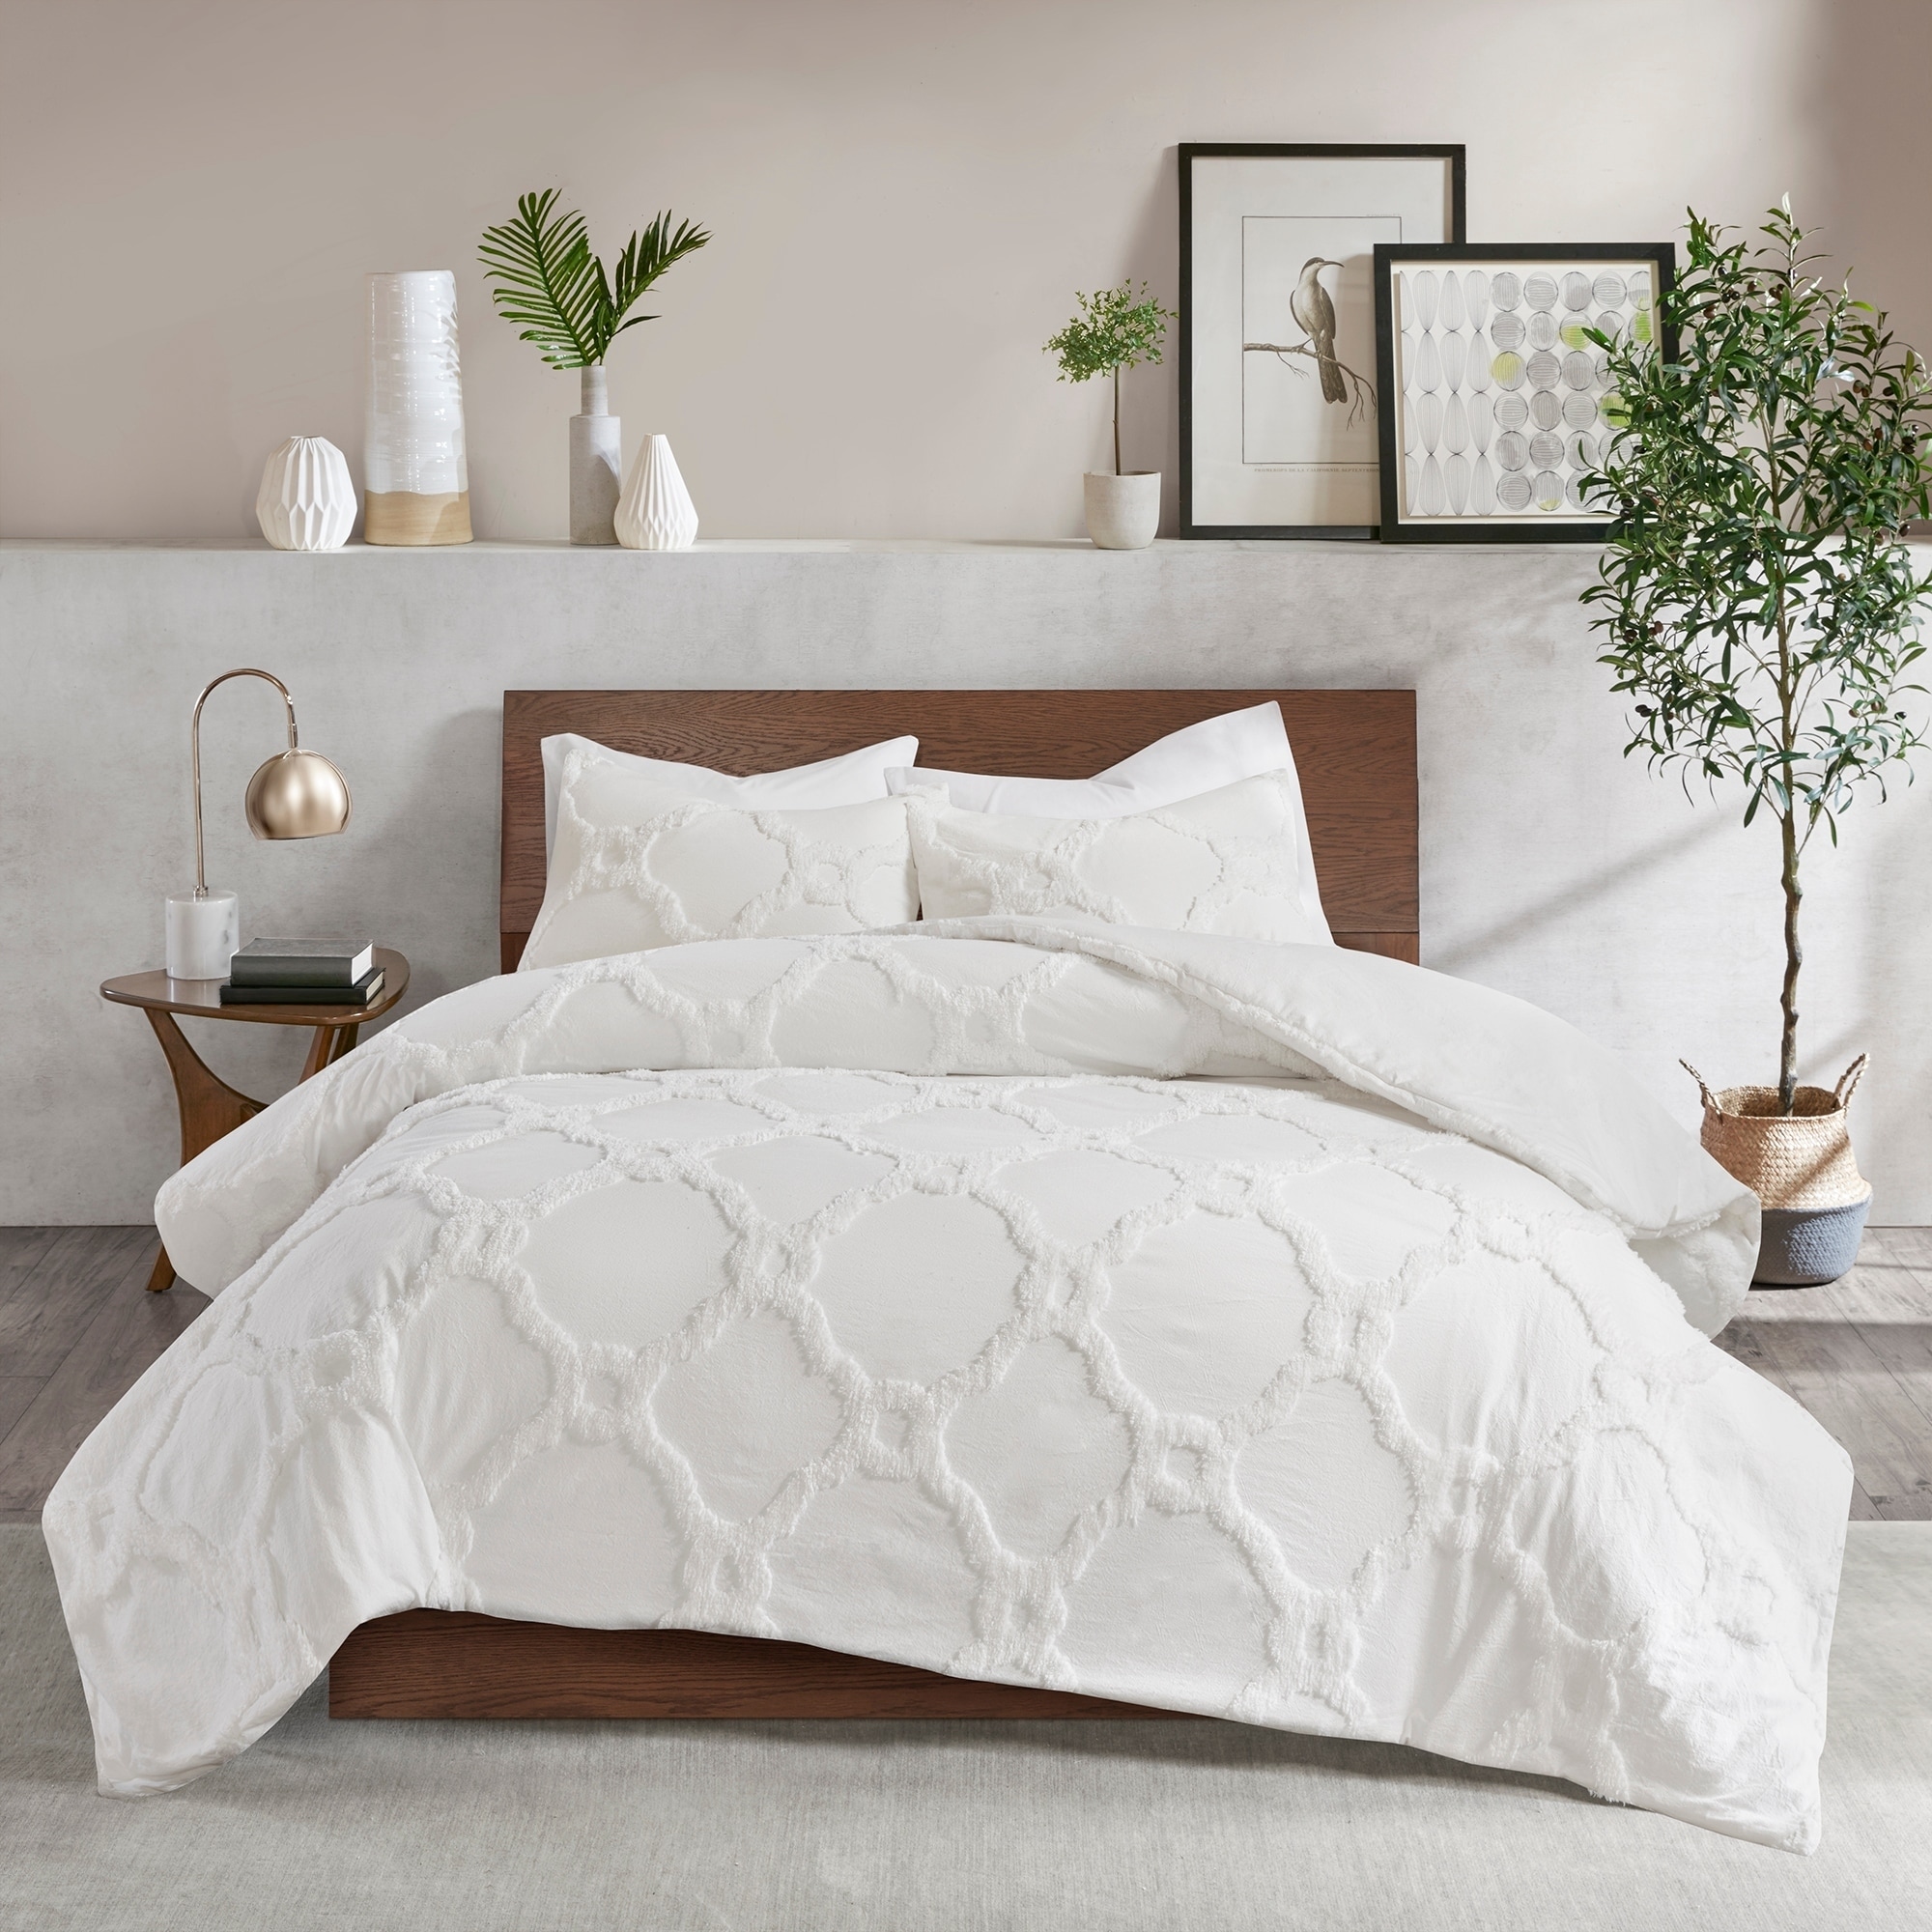 Madison Park Nollie Cotton Chenille Geometric King Cal King Size Comforter Set In White As Is Item Overstock 23441940